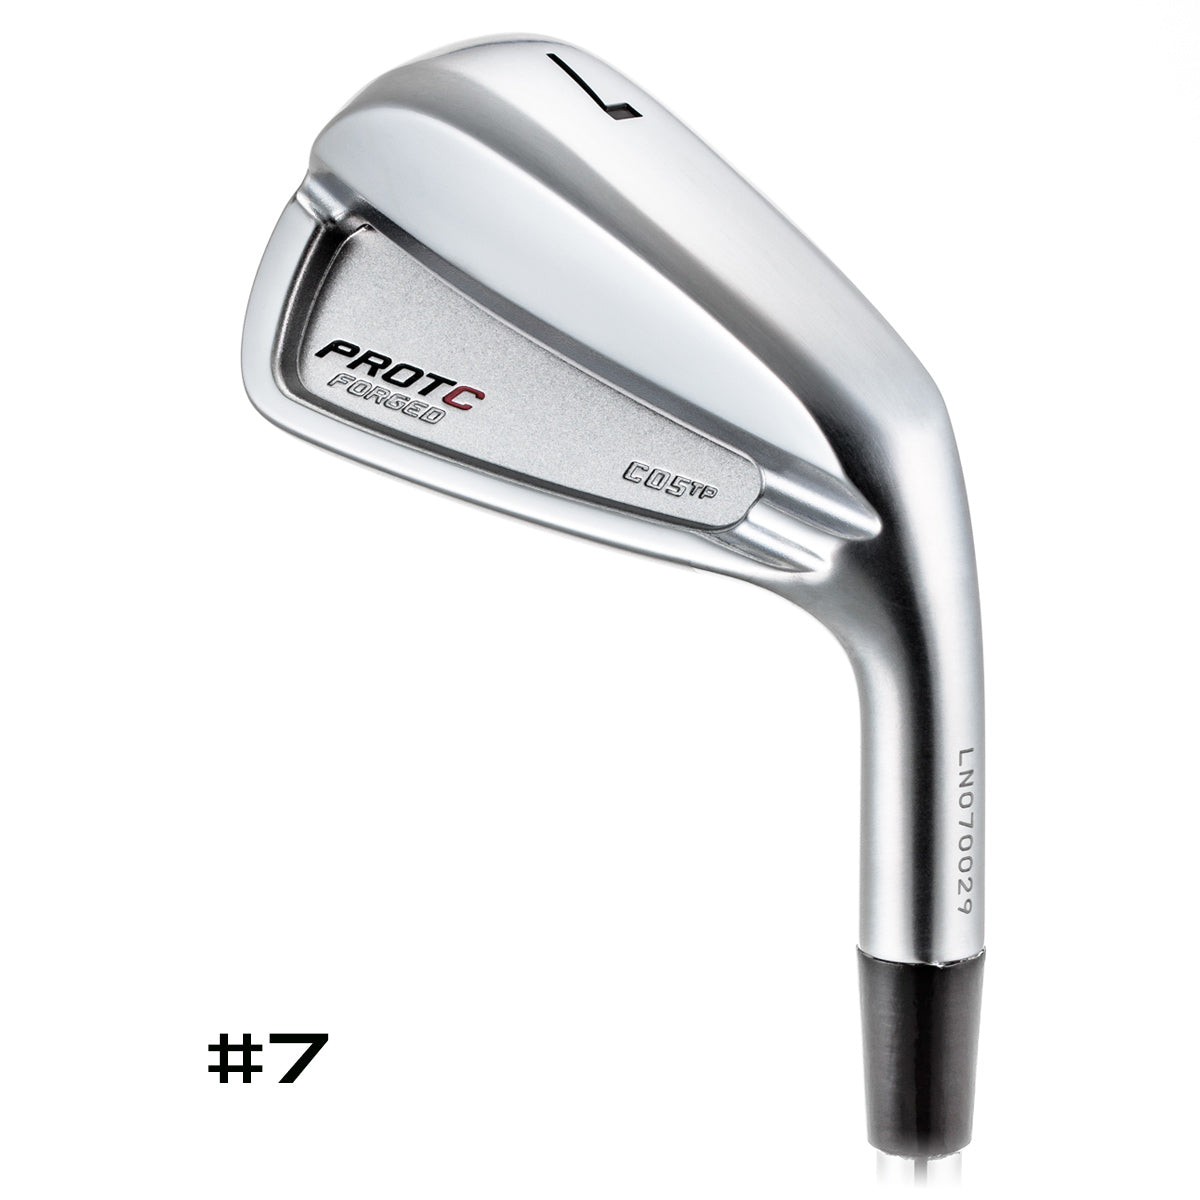 PROTOCONCEPT Golf, C05TP FORGED IRON - 2